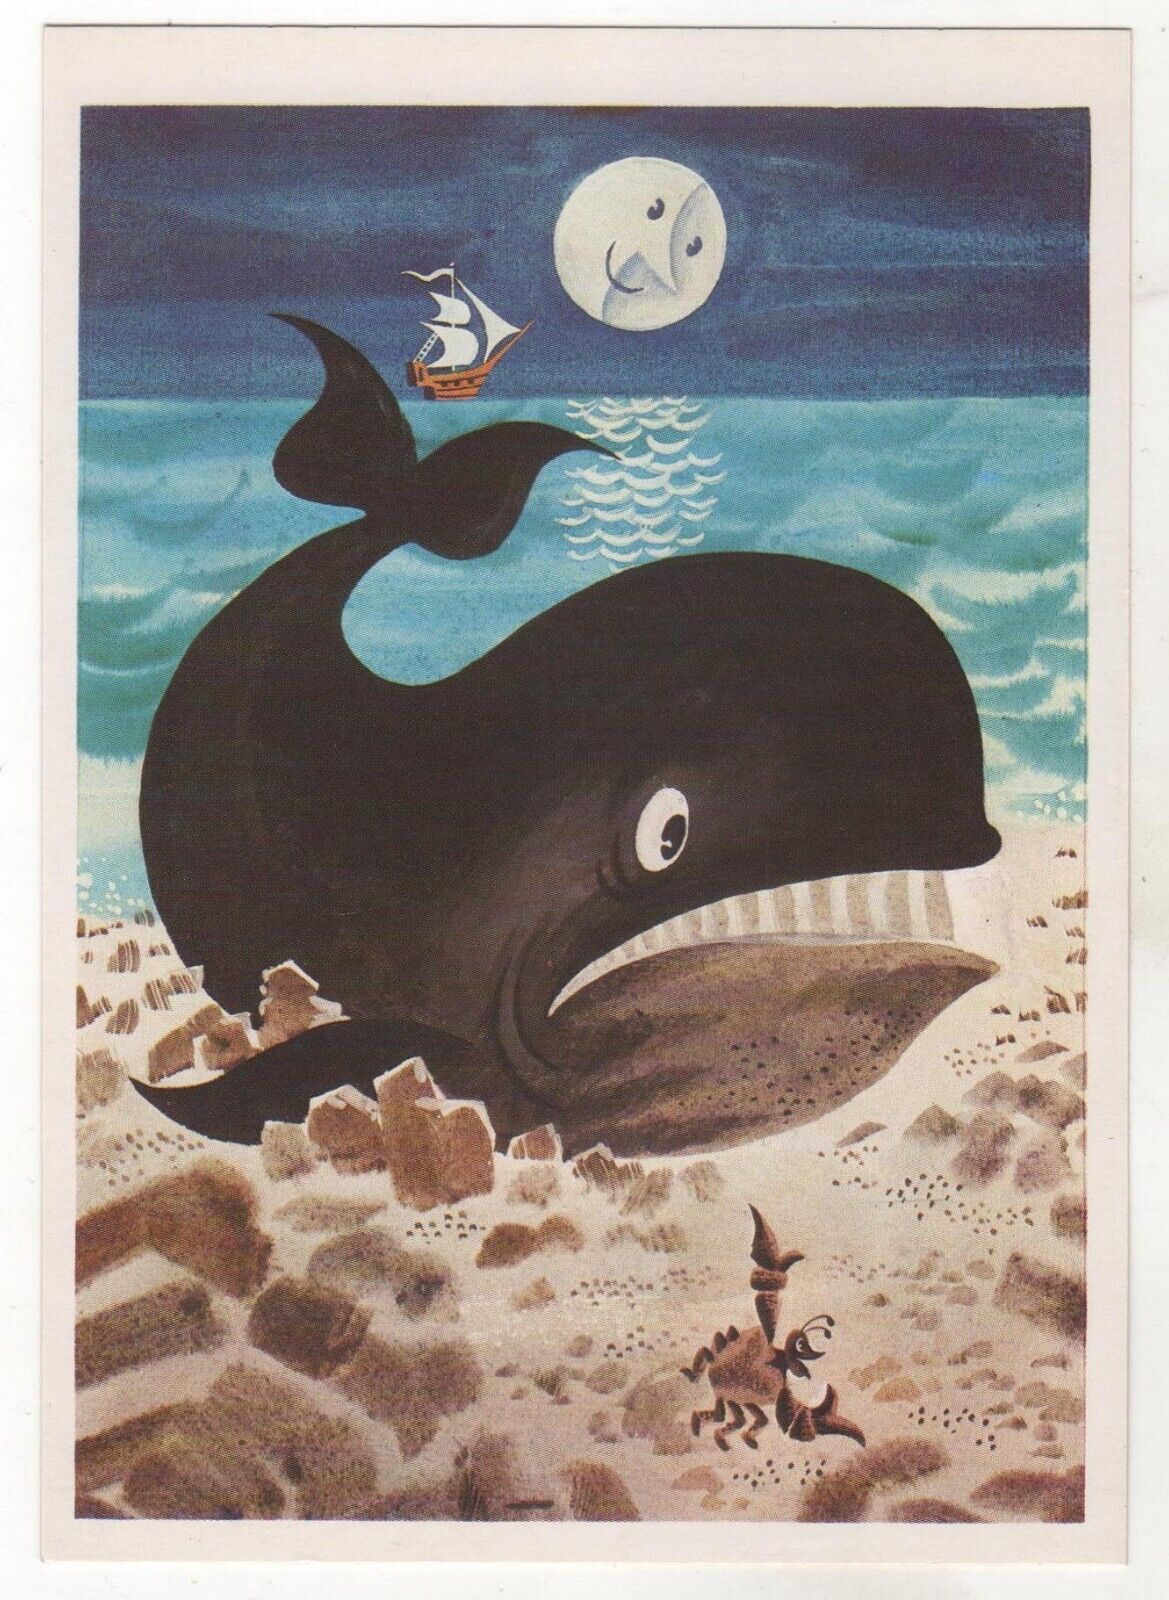 1963 Fairy Tale Whale was hunting for fish & Crab Moon ART Soviet POSTCARD Old